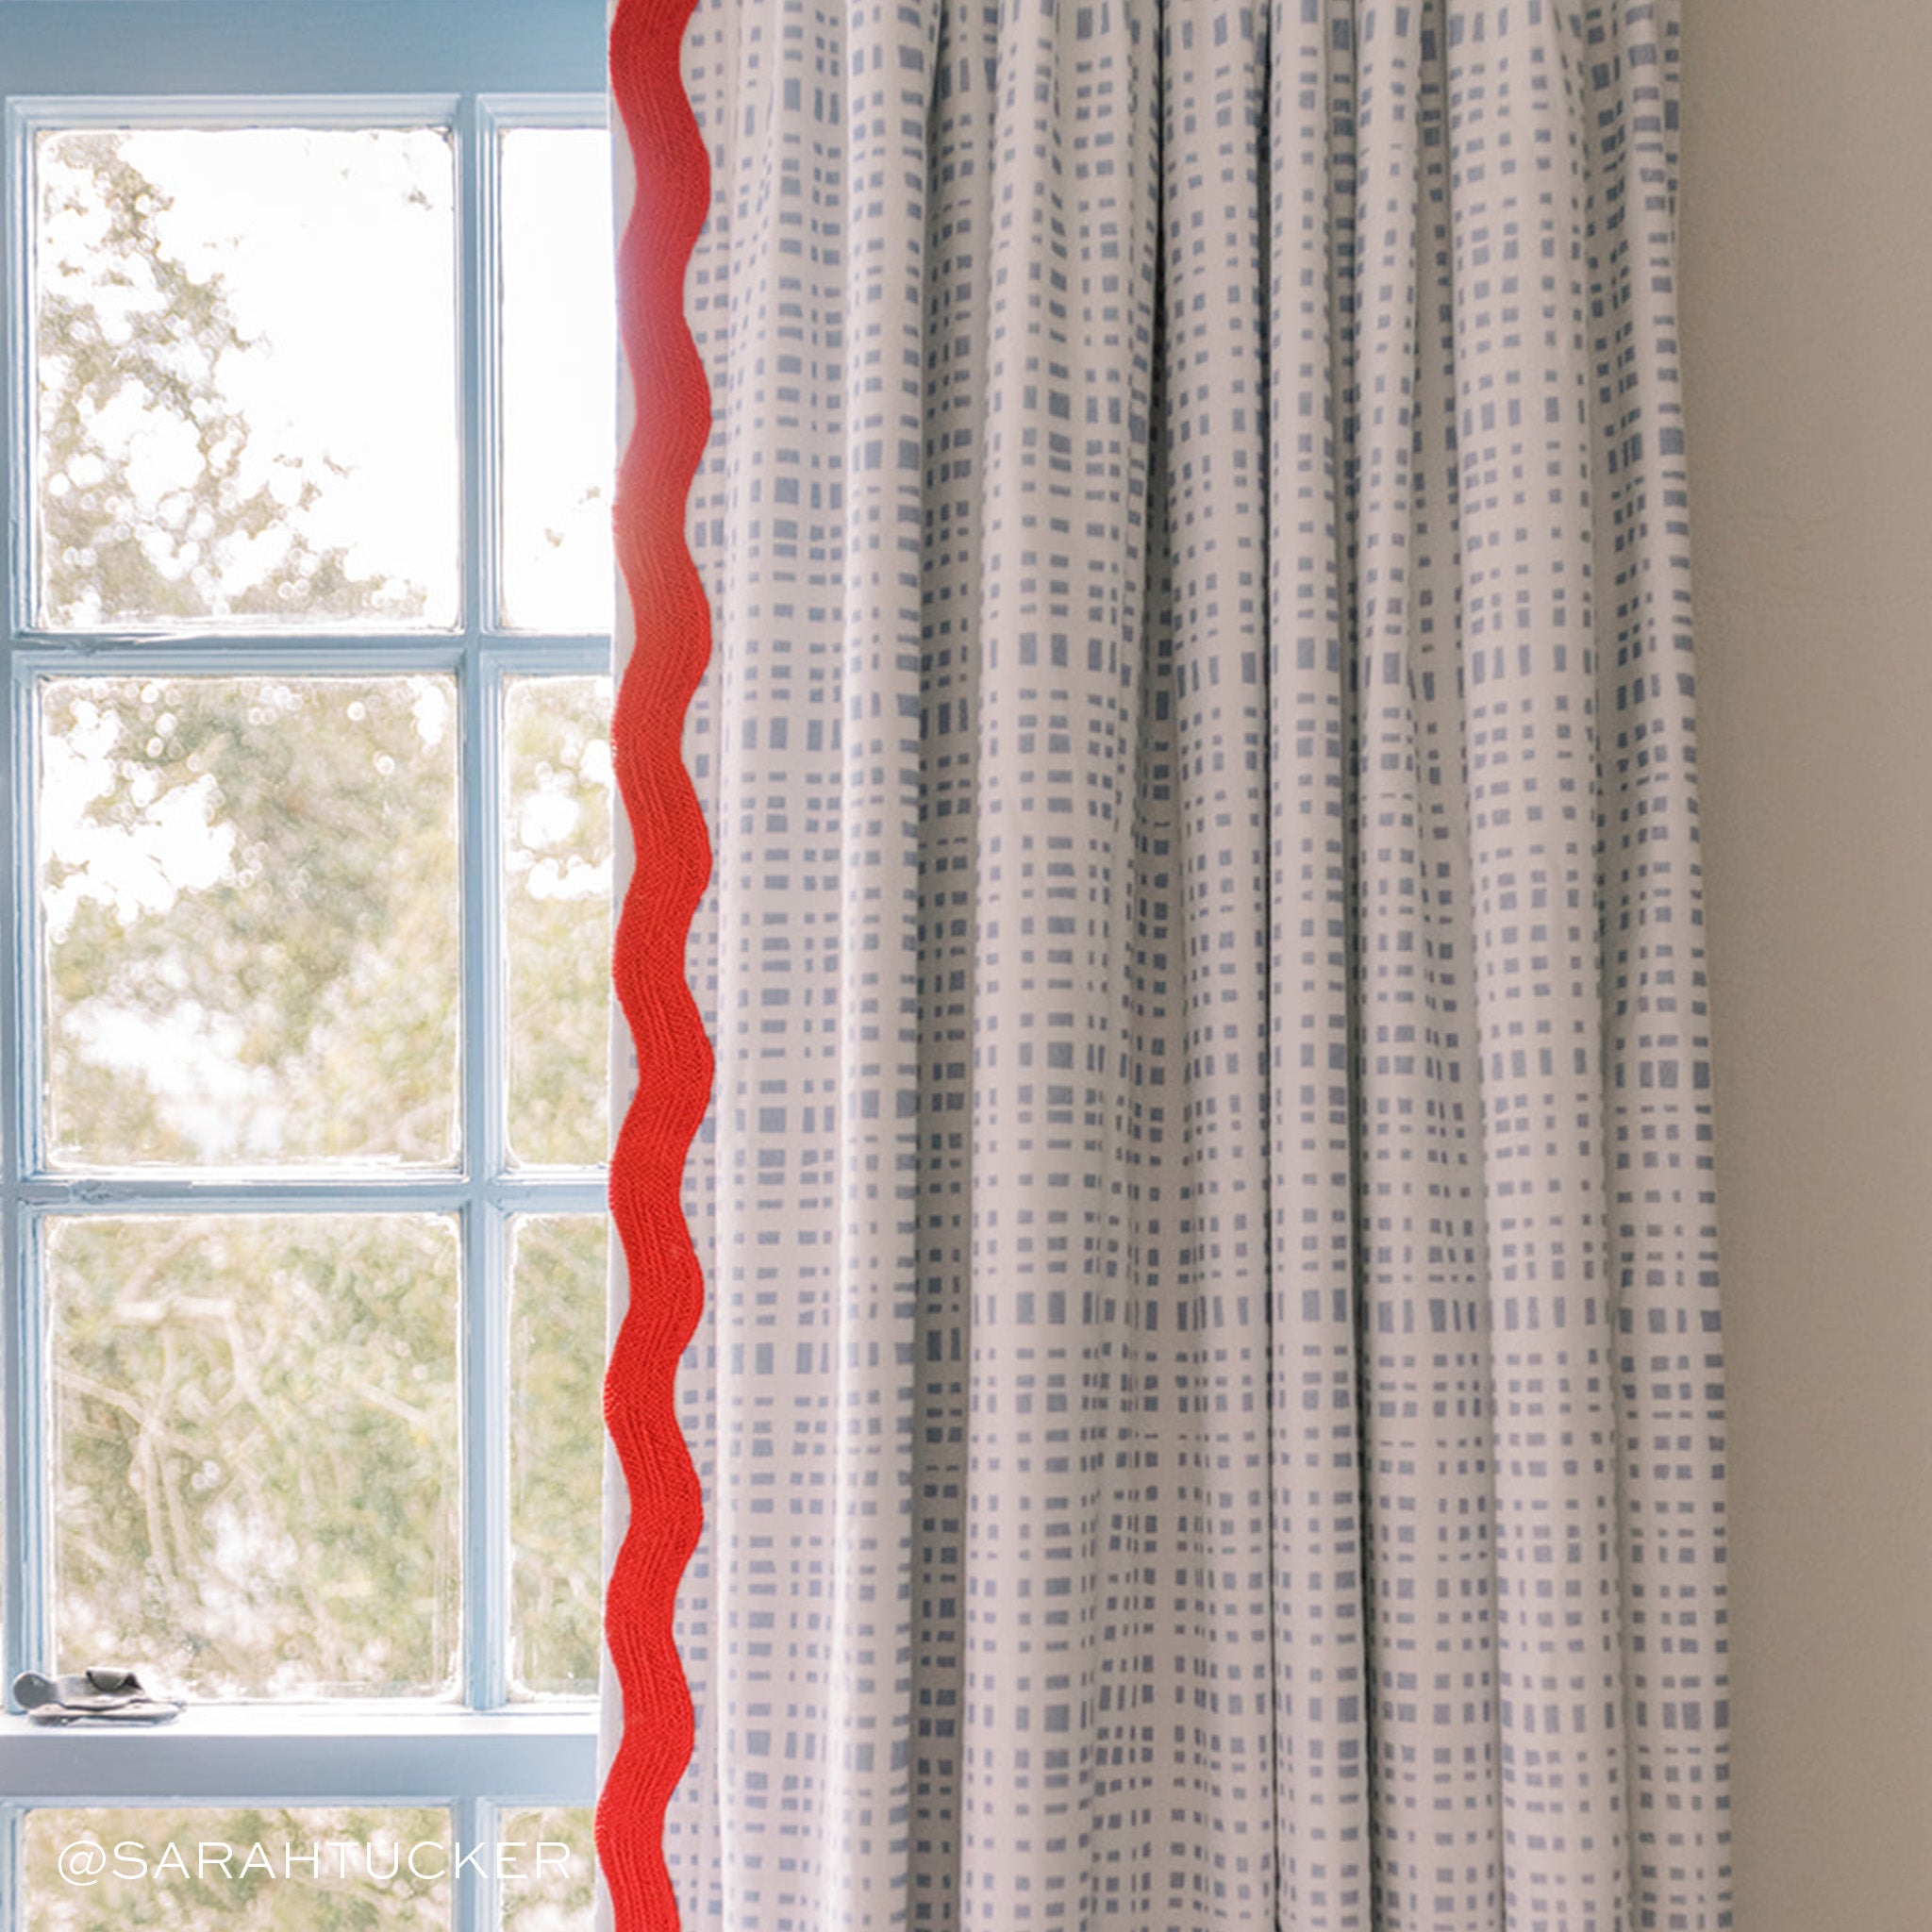 Sky Blue Gingham Curtain with red band Close-Up next to window. Photo taken by Sarah Tucker